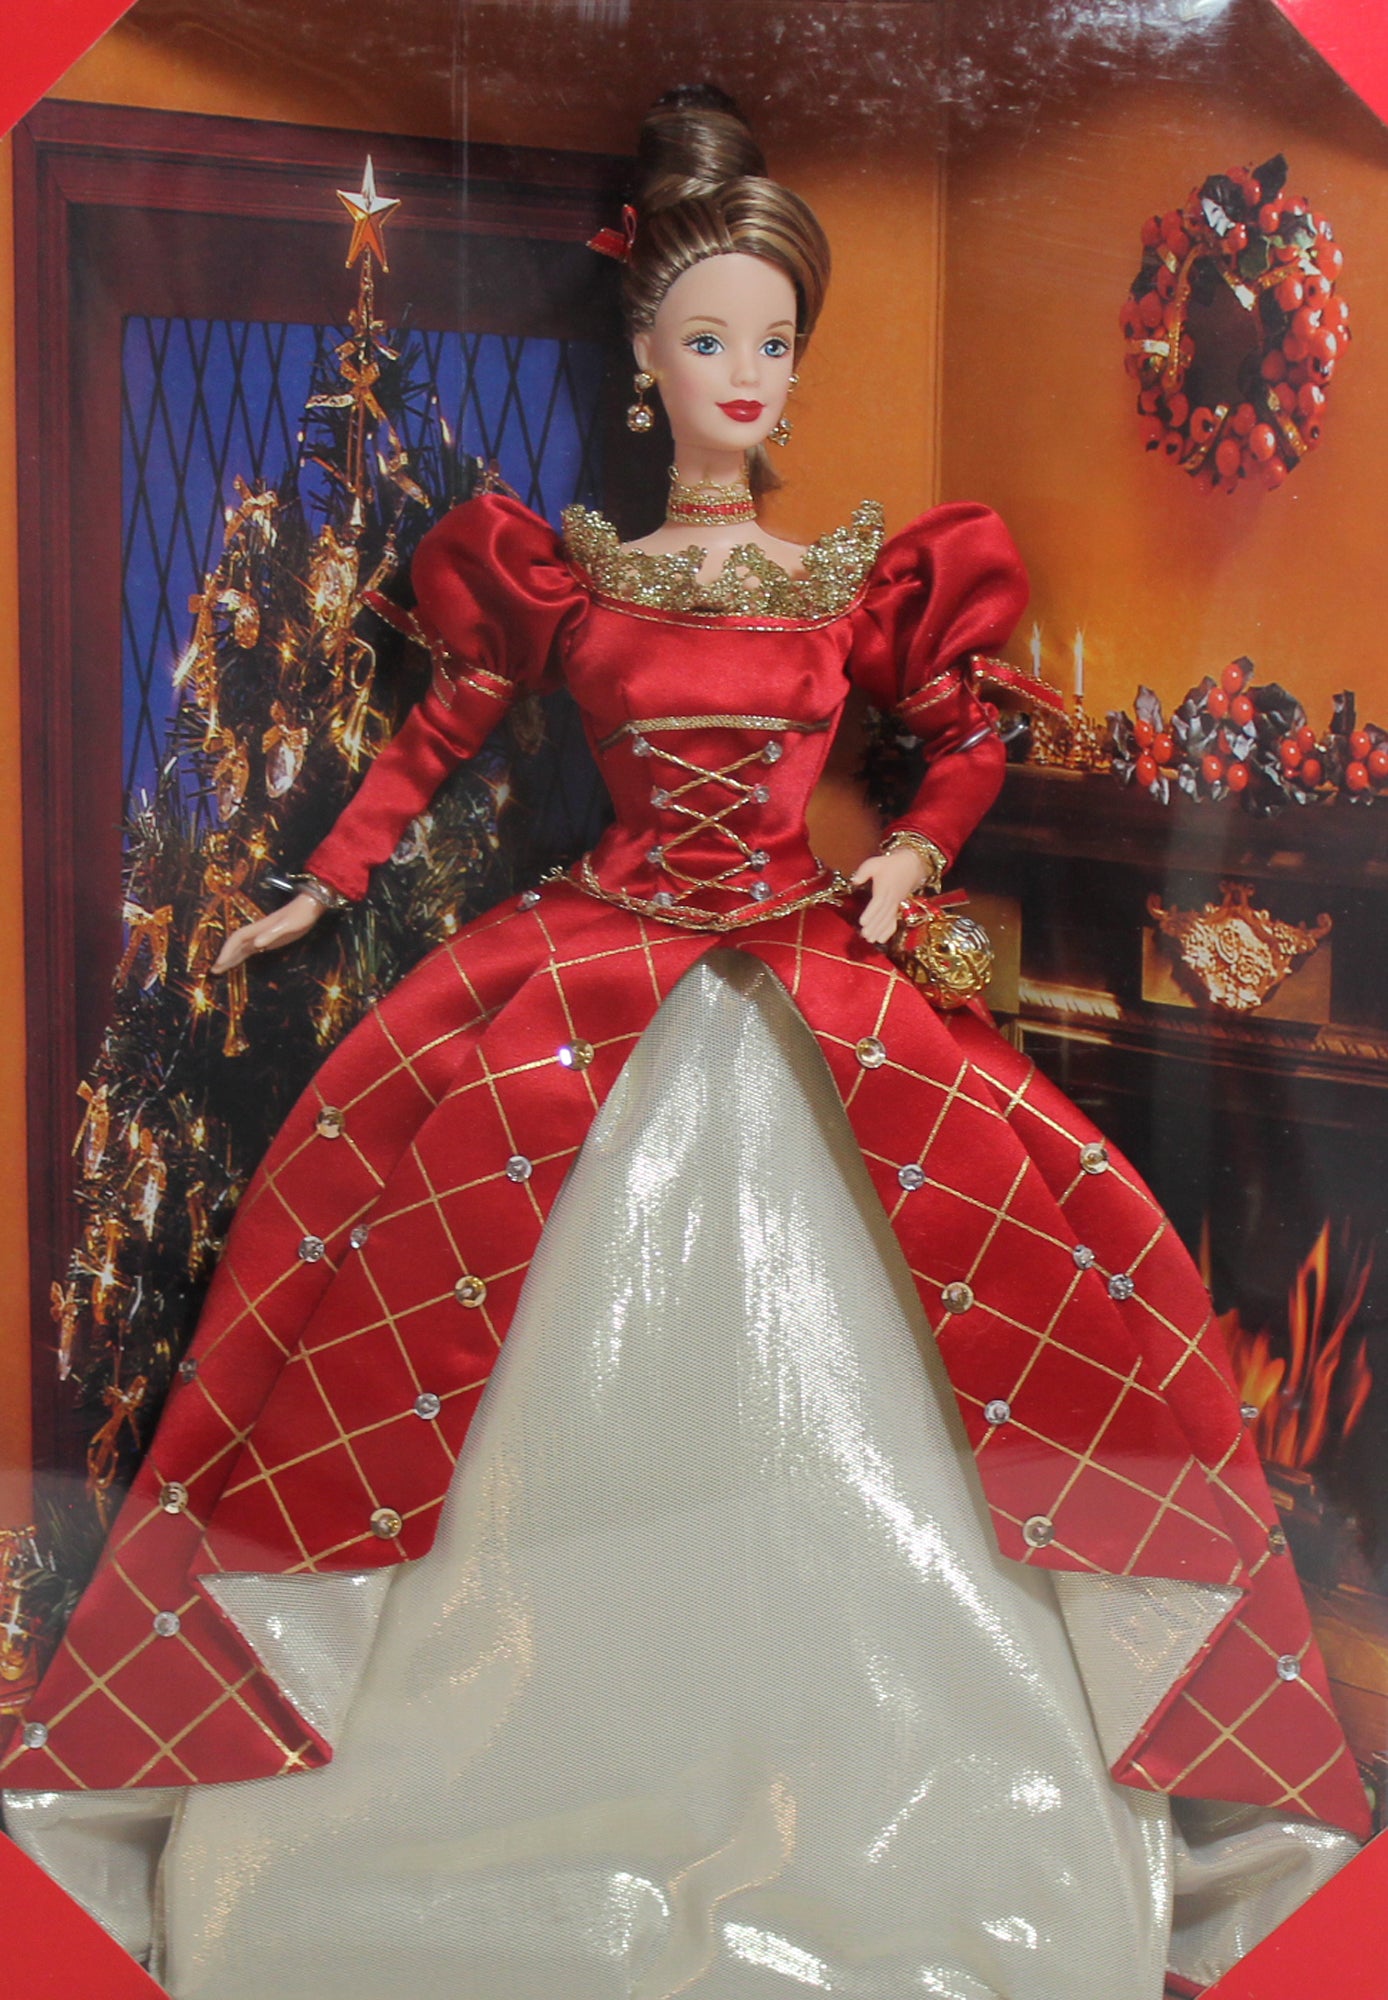 Barbie Signature Doll Anna May Wong in Red Gown Inspiring Women Collector  Series for Girls 3 years up